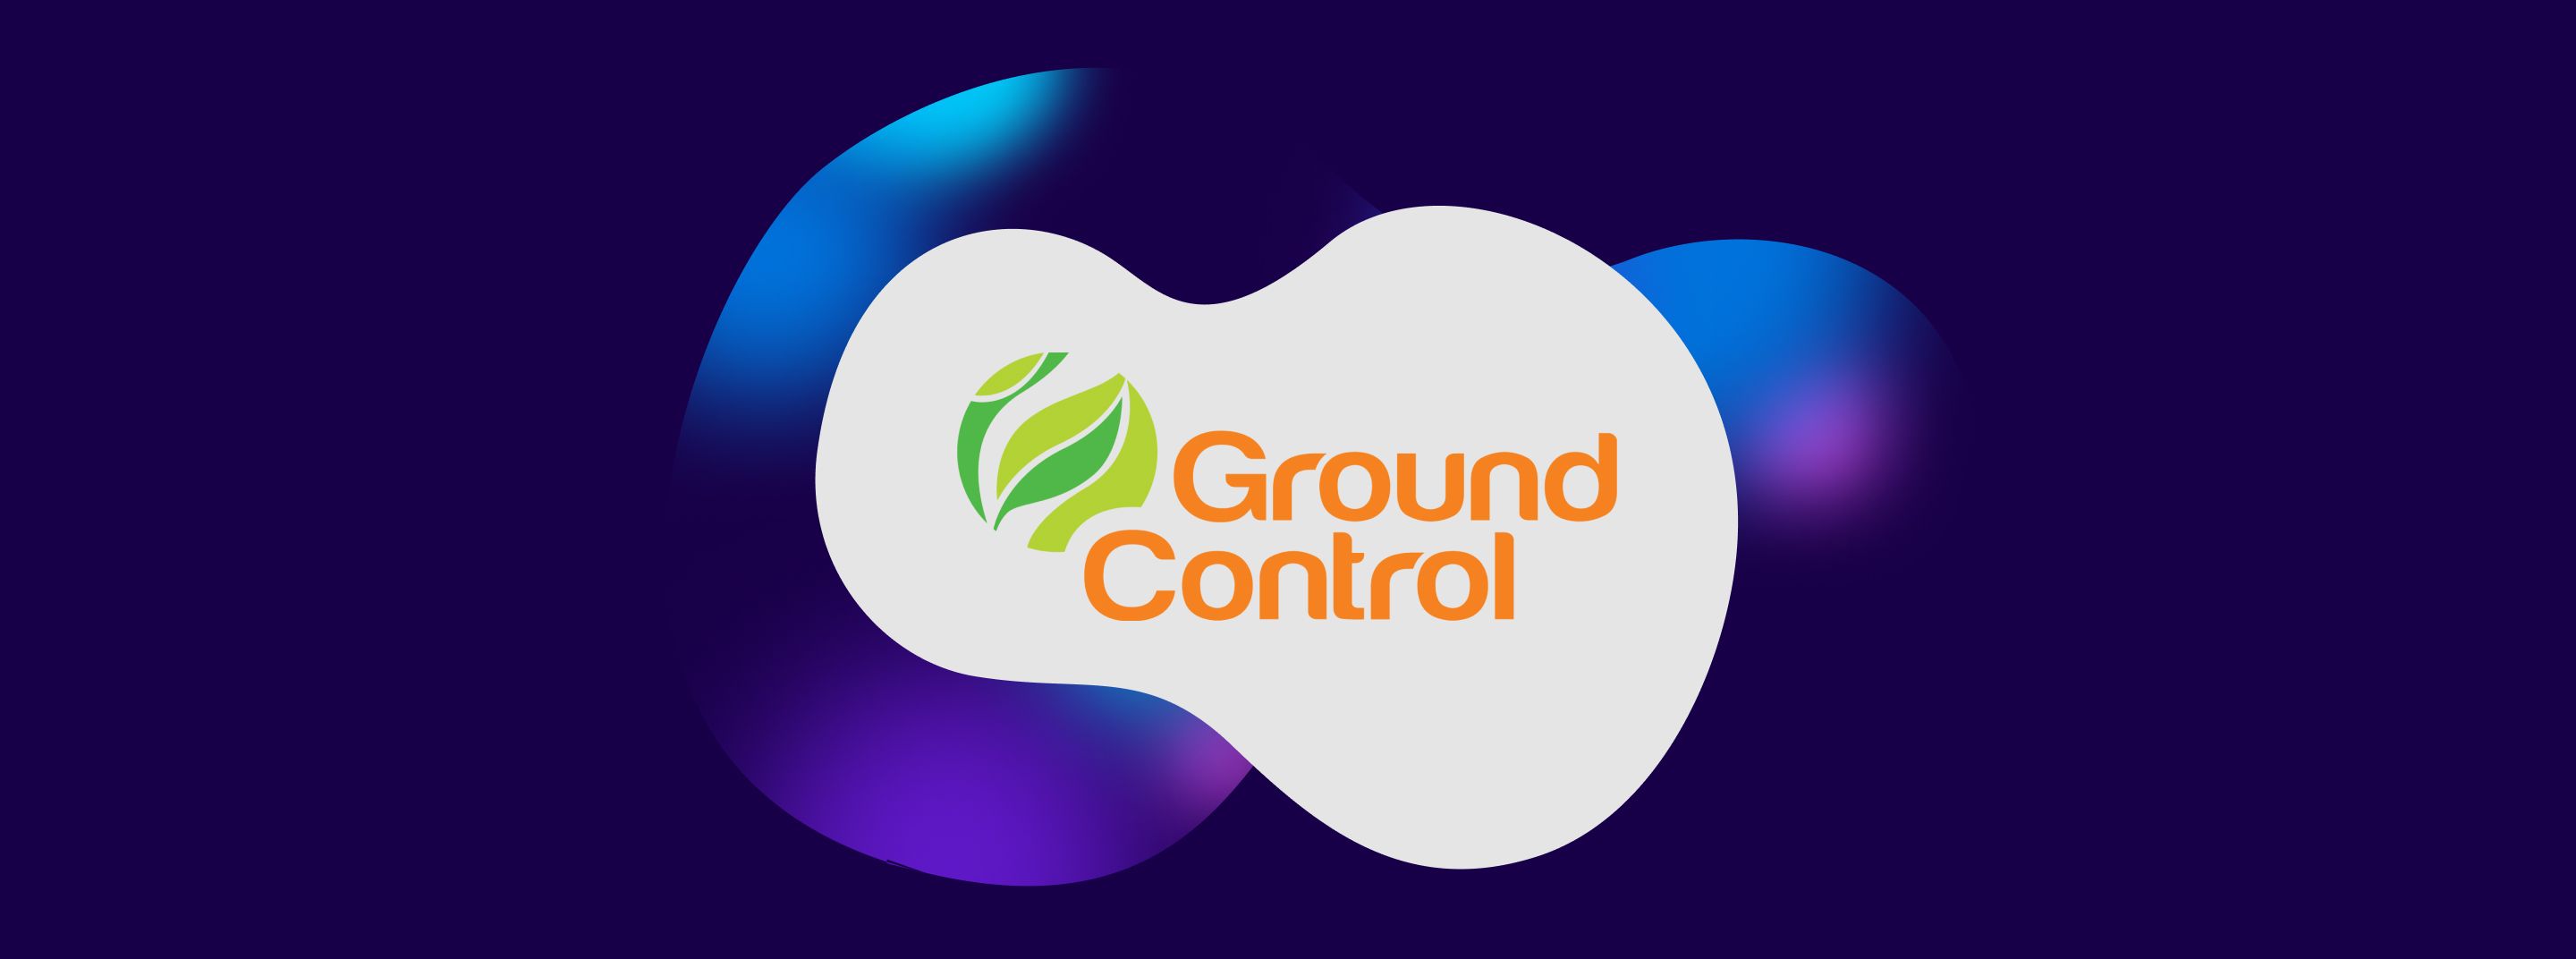 Ground Control logo on a blue background with a ink and light blue cloud behind it